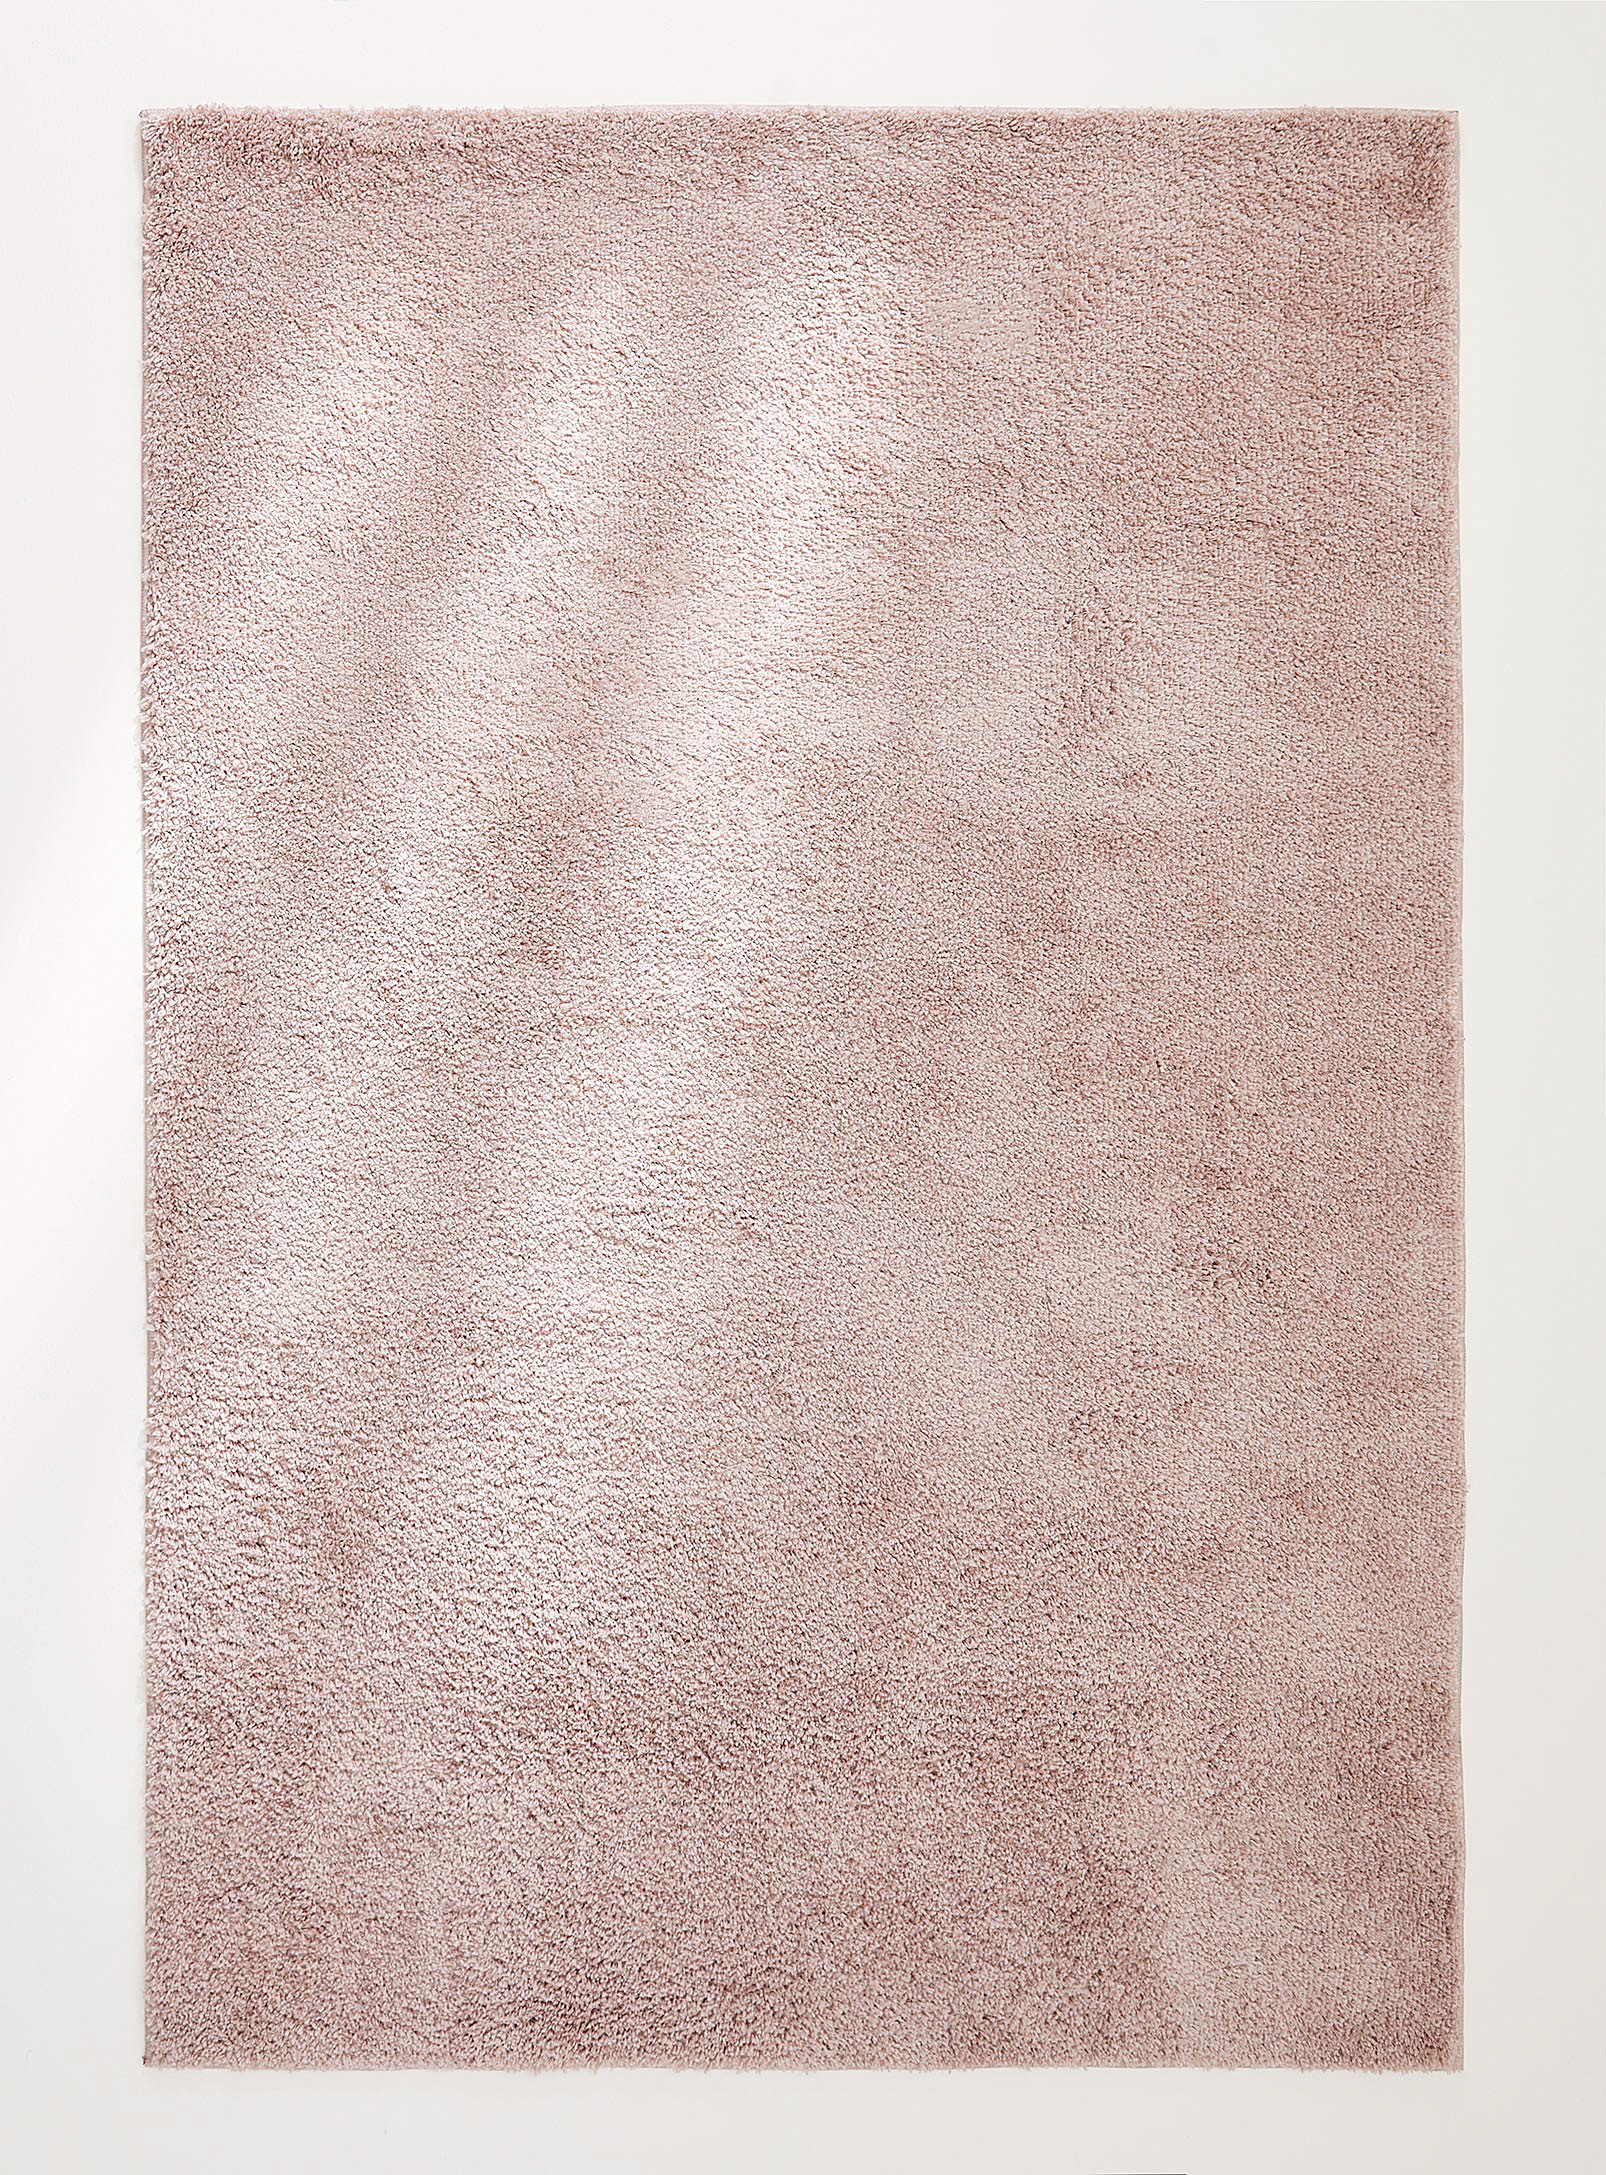 Simons Maison Nature's Essence Shag Rug See Available Sizes In Dusky Pink